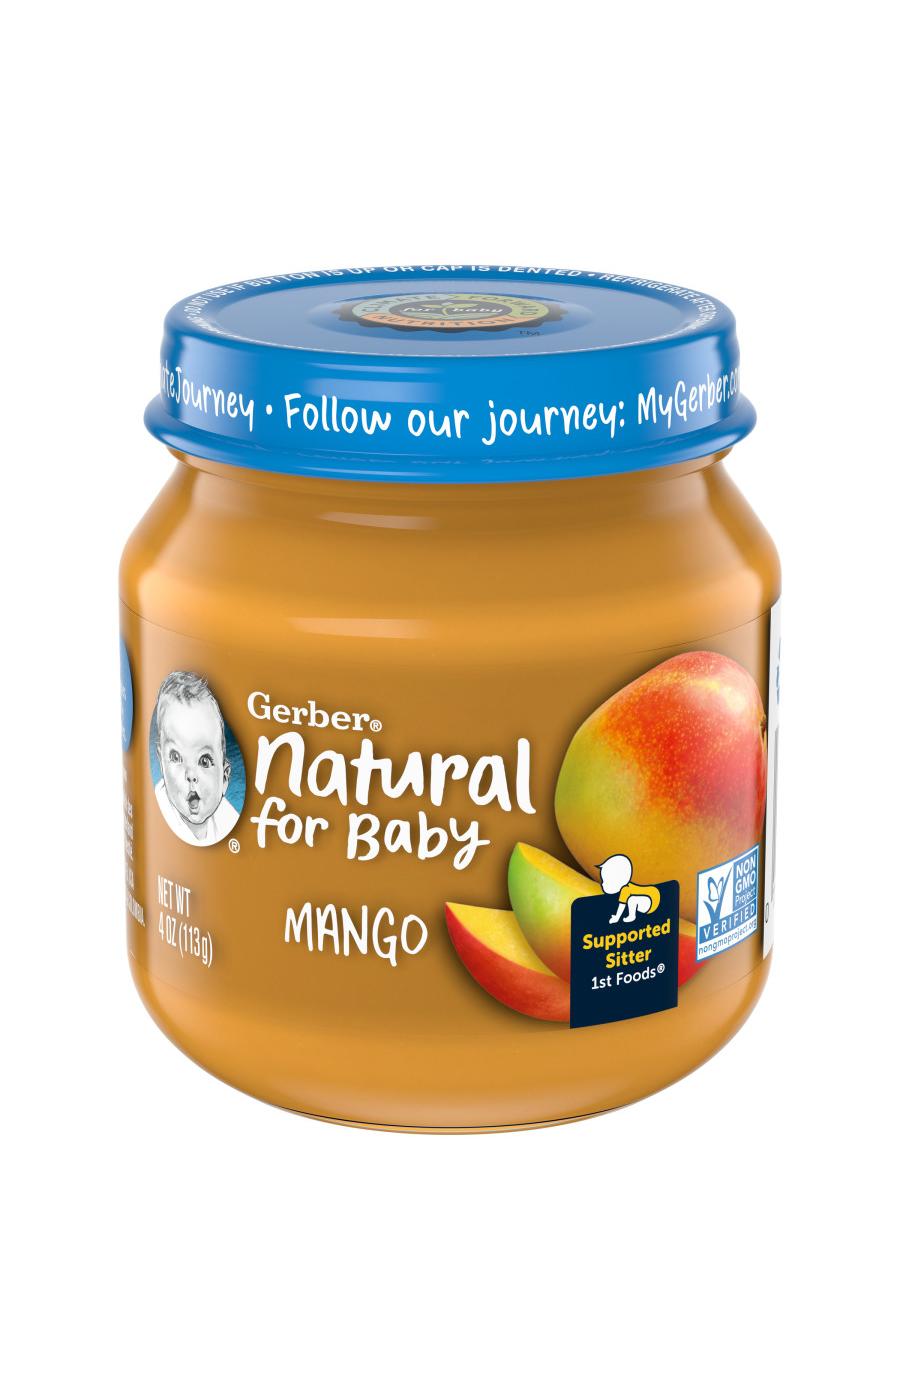 Gerber Natural for Baby 1st Foods - Mango; image 1 of 8